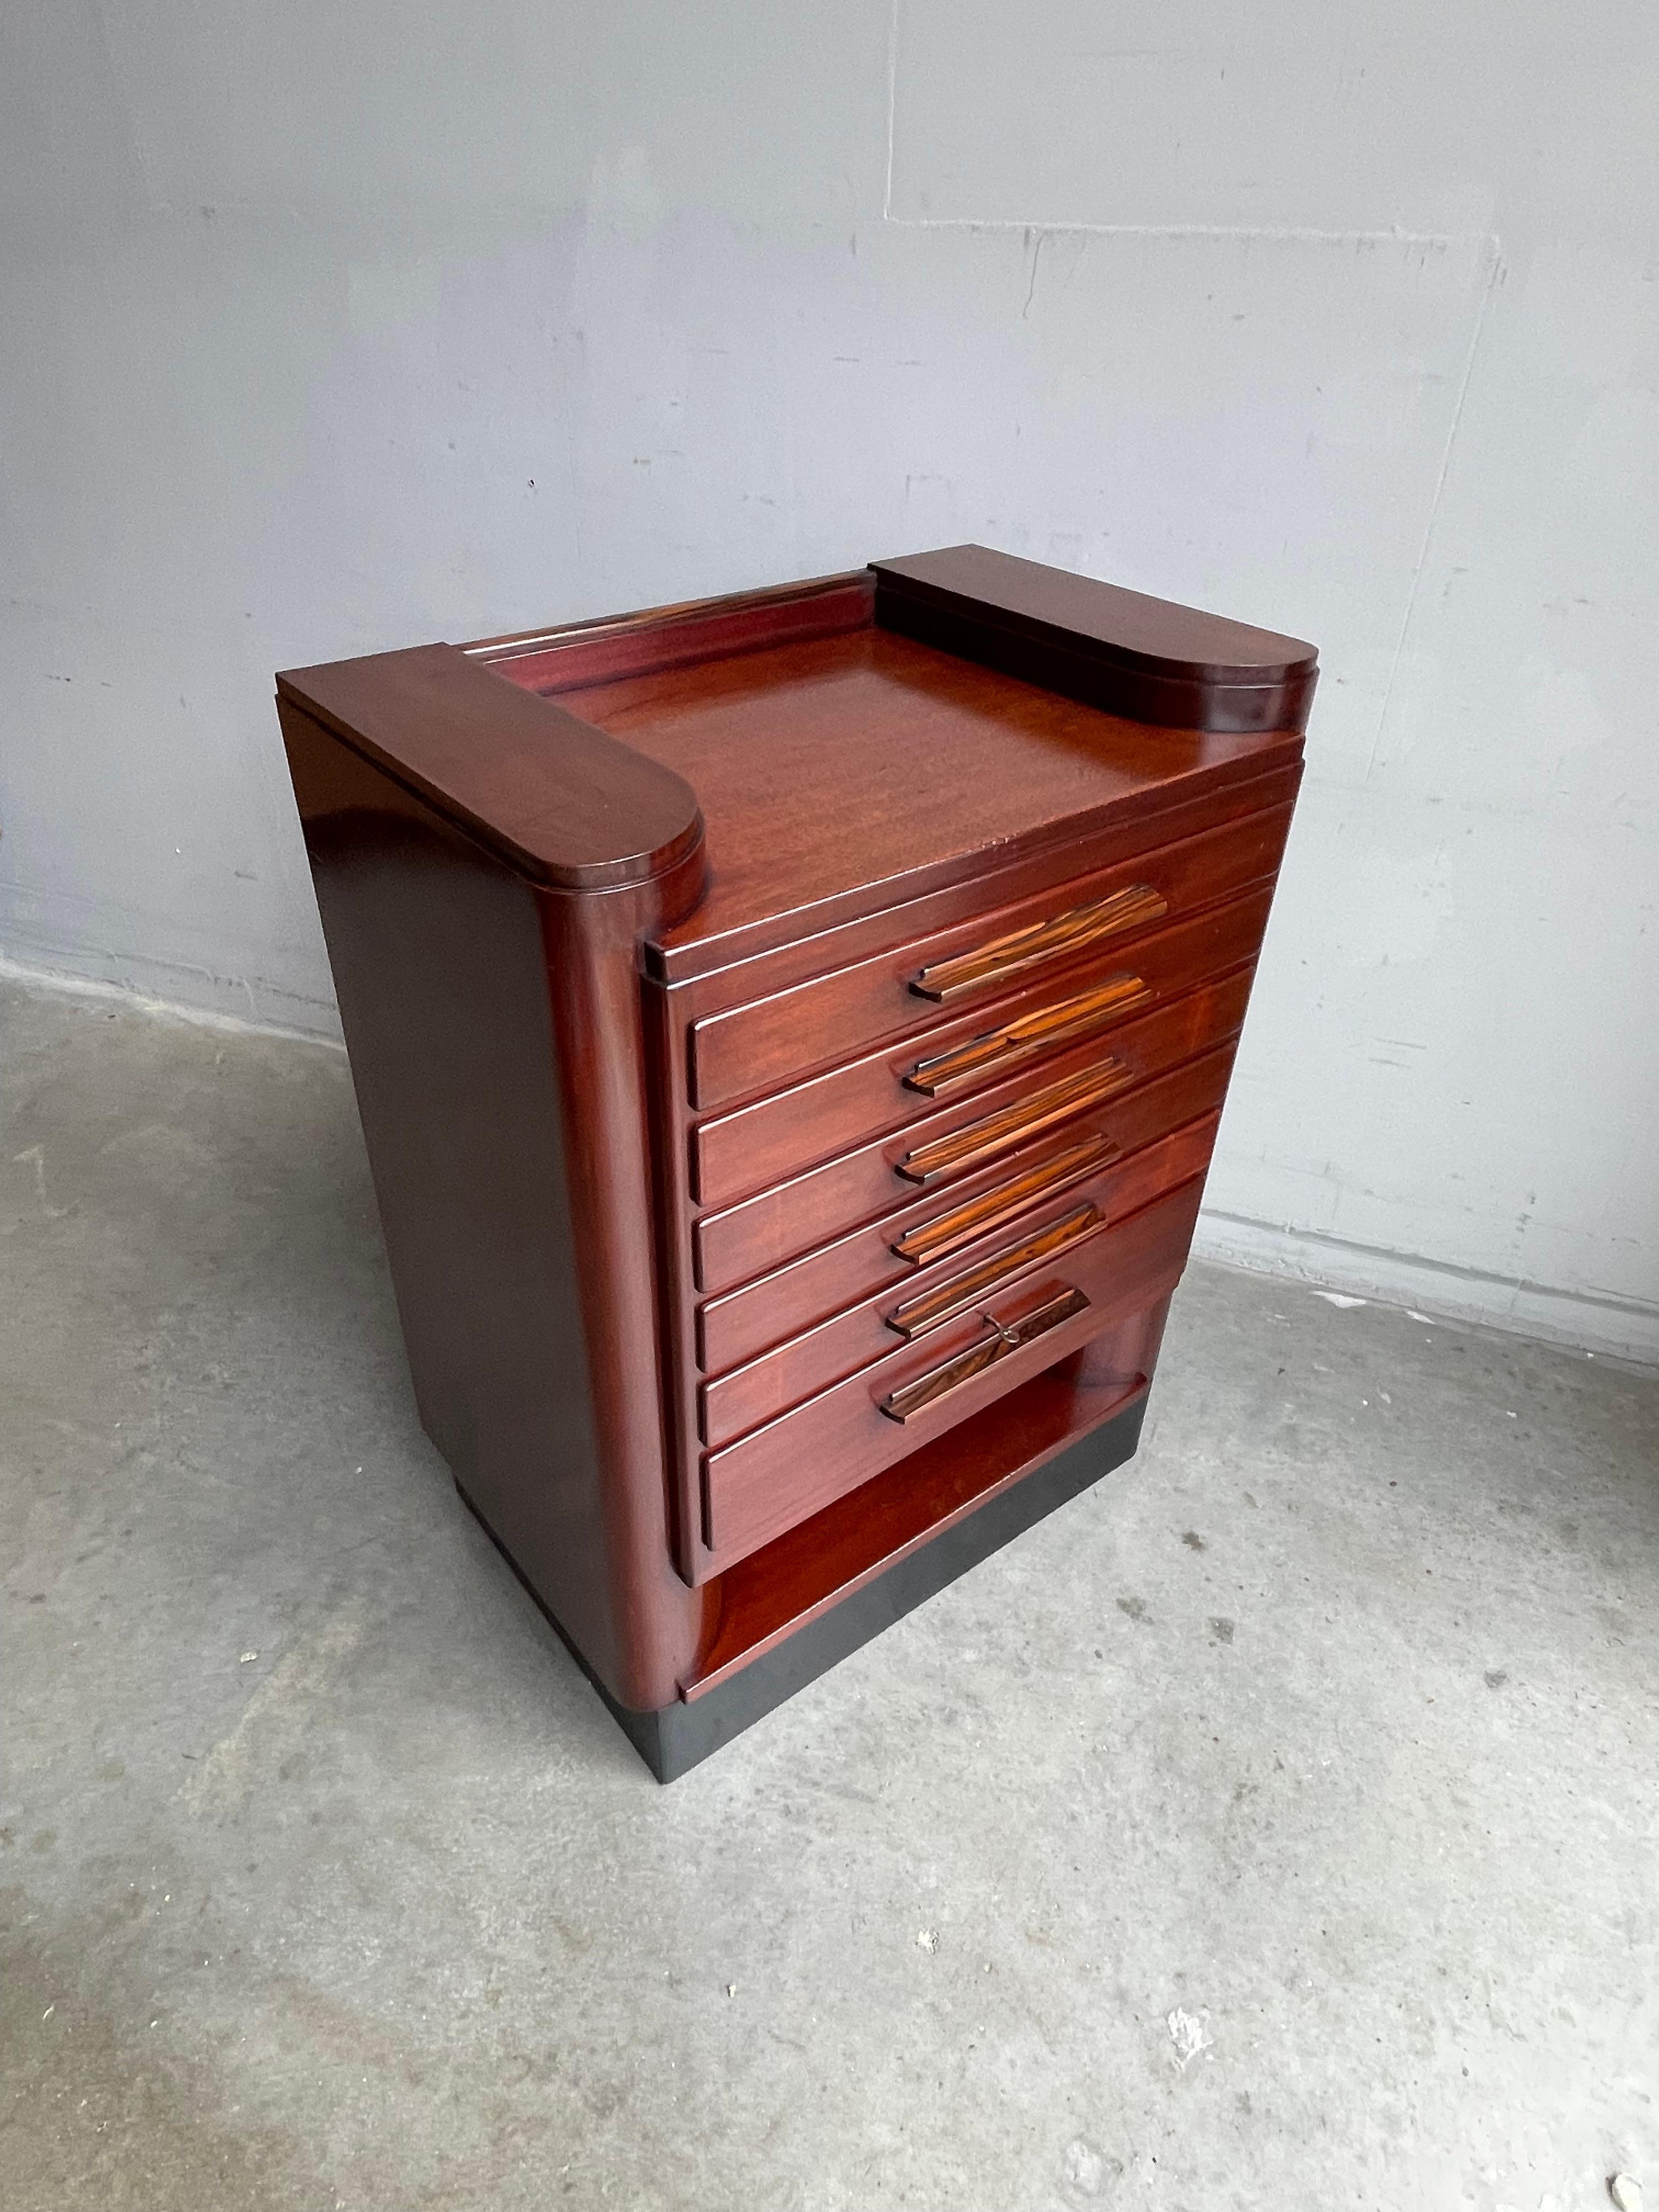 Rare Art Deco Chest of Drawers / Filing Cabinet with Stunning Coromandel Handles For Sale 10